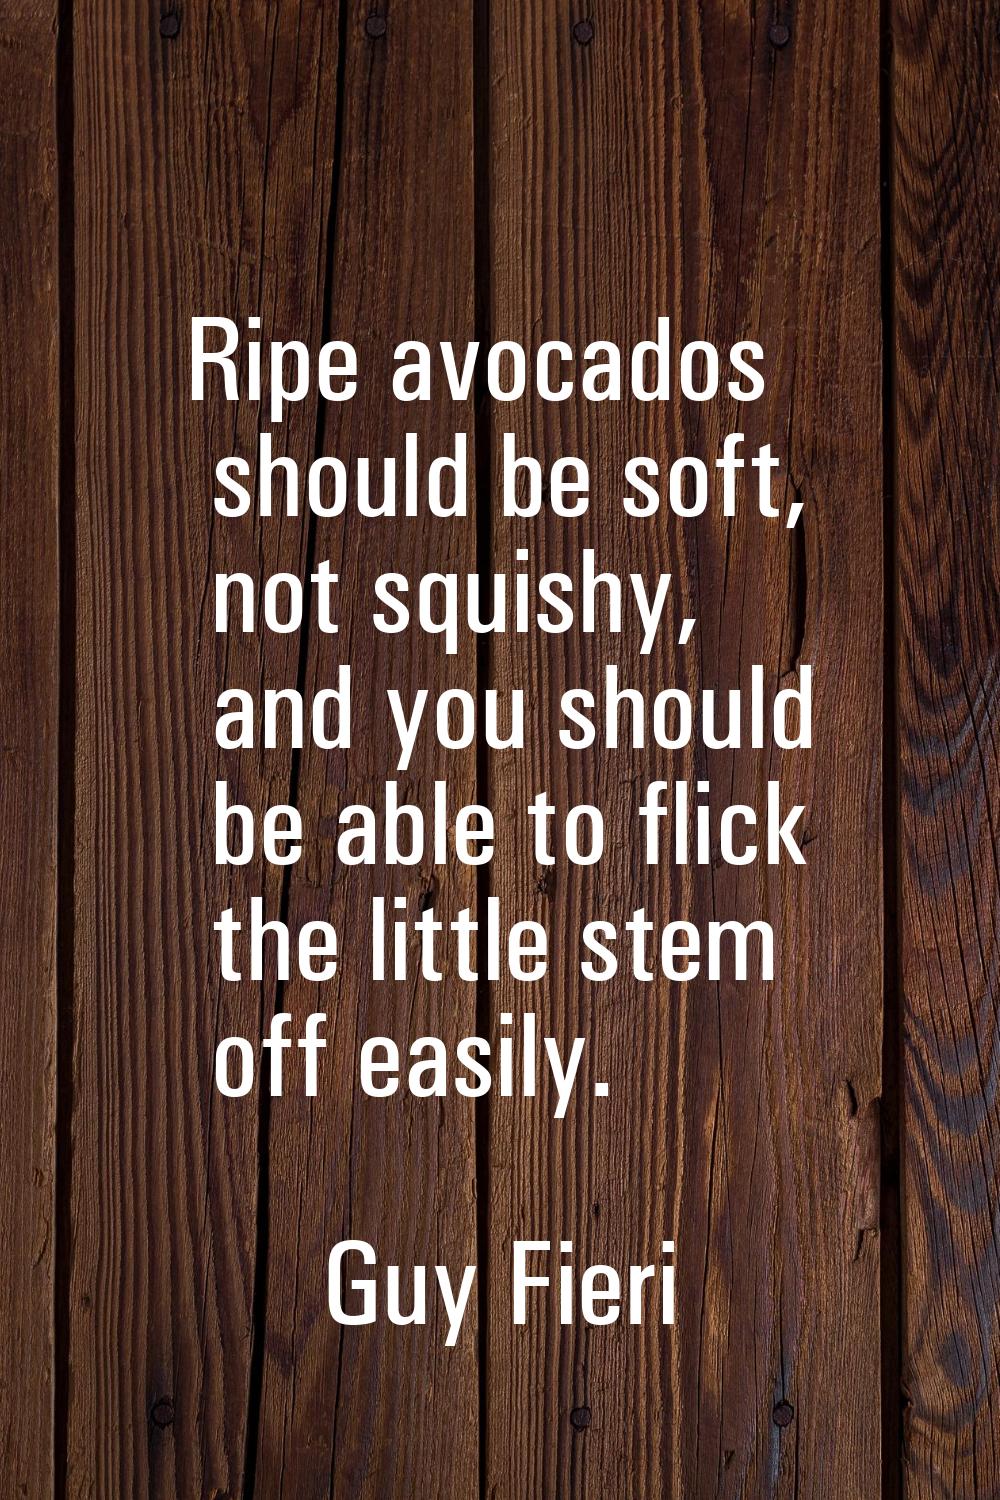 Ripe avocados should be soft, not squishy, and you should be able to flick the little stem off easi